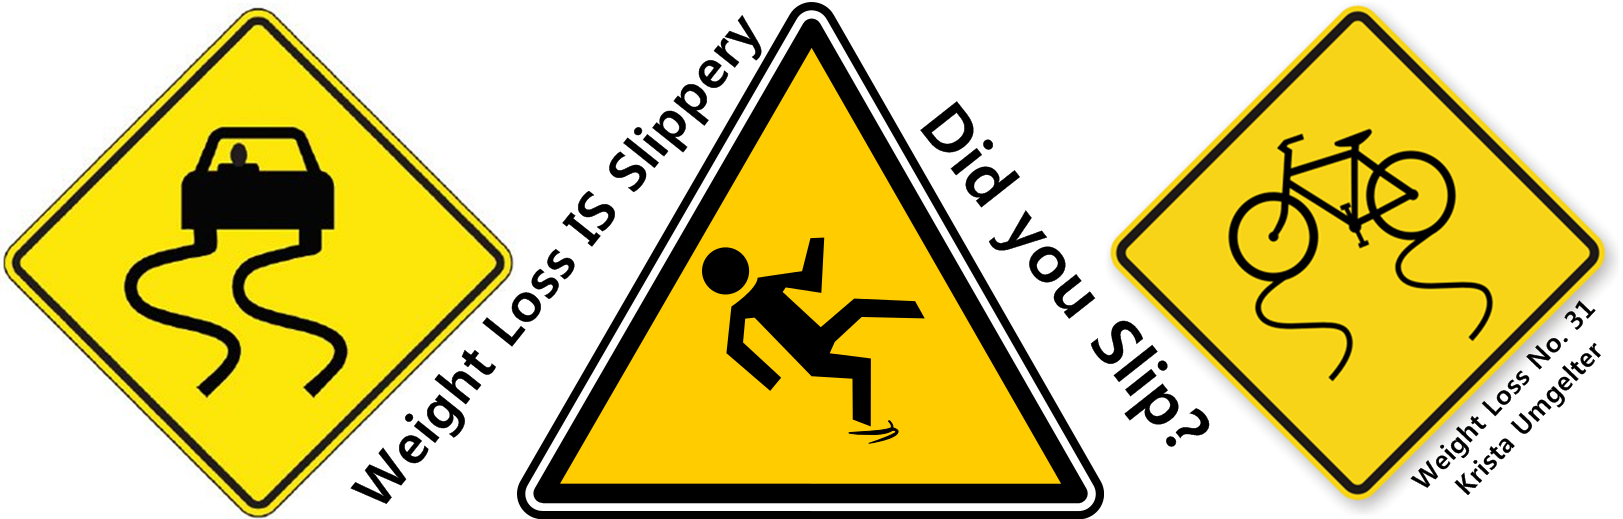 Weight Loss is Slippery. Did you slip? Are you about to? – Weight Loss No. 31